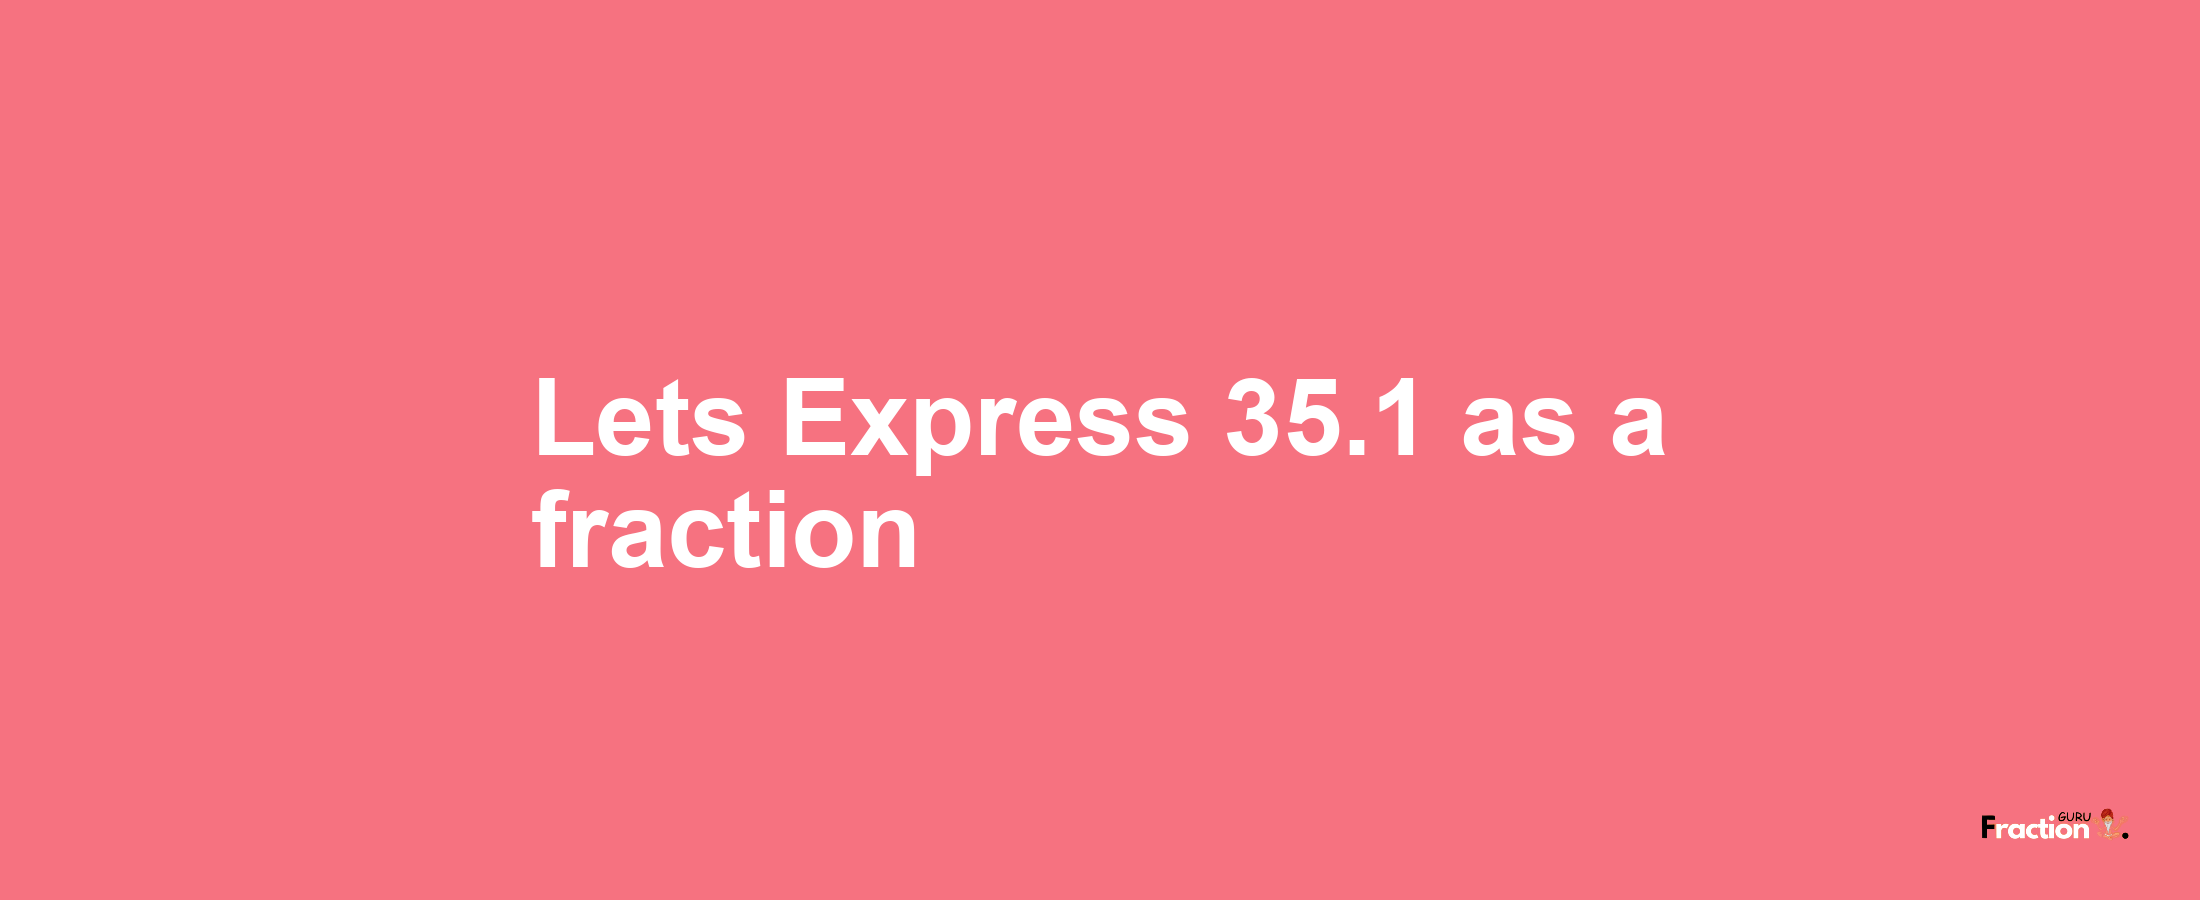 Lets Express 35.1 as afraction